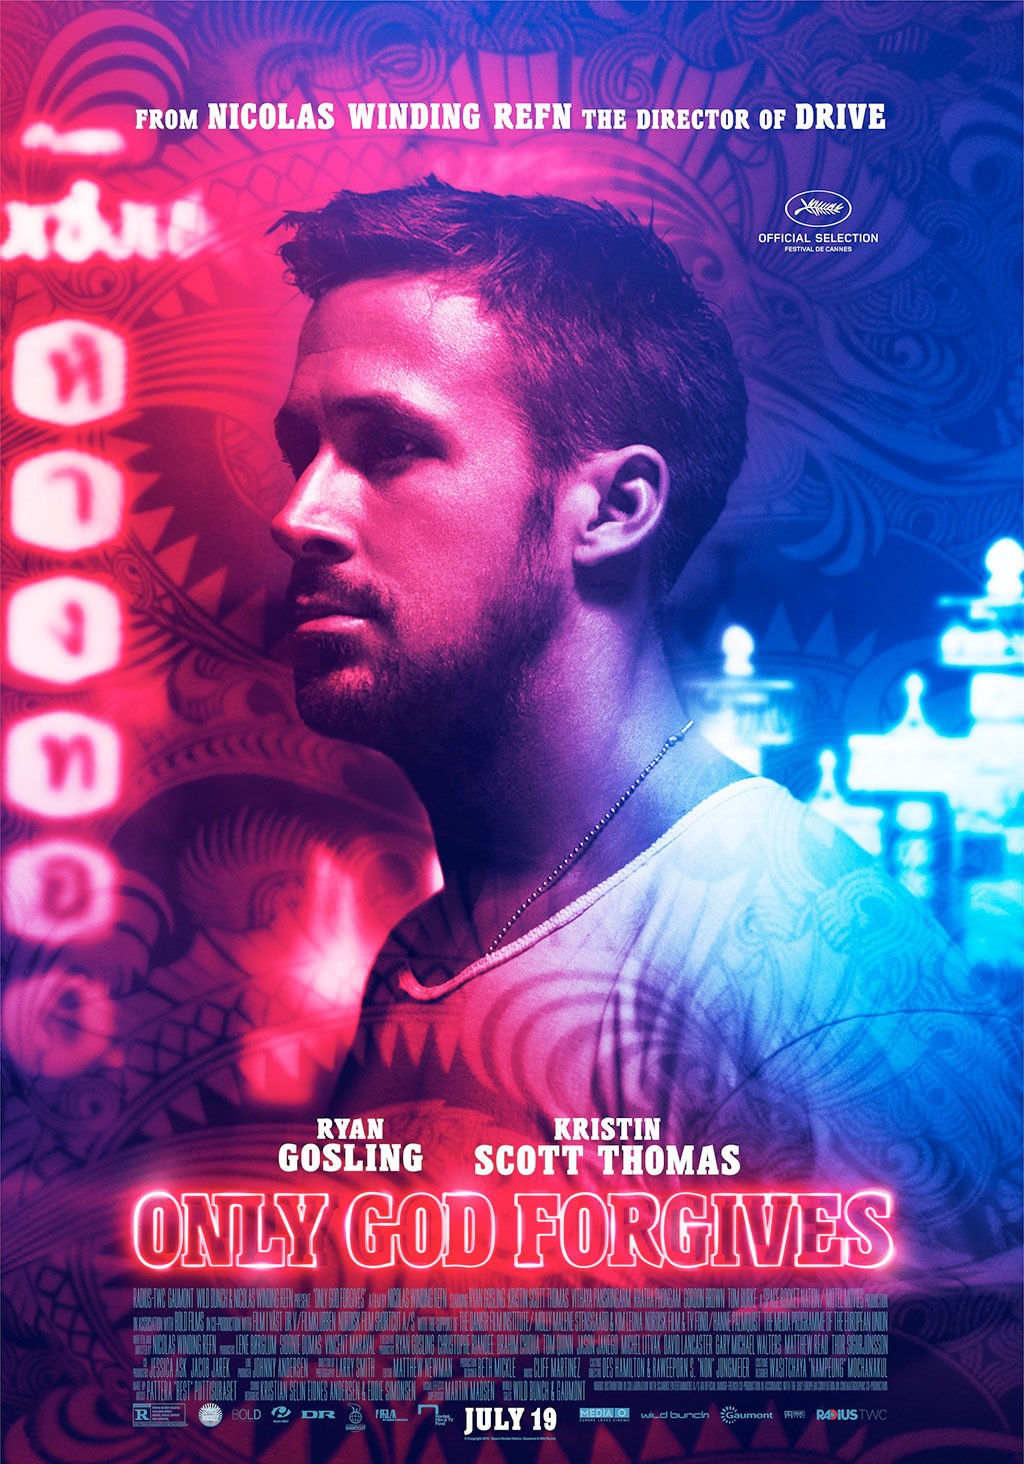 Only God Forgives: Why Refn’s latest picture is a misunderstood masterpiece